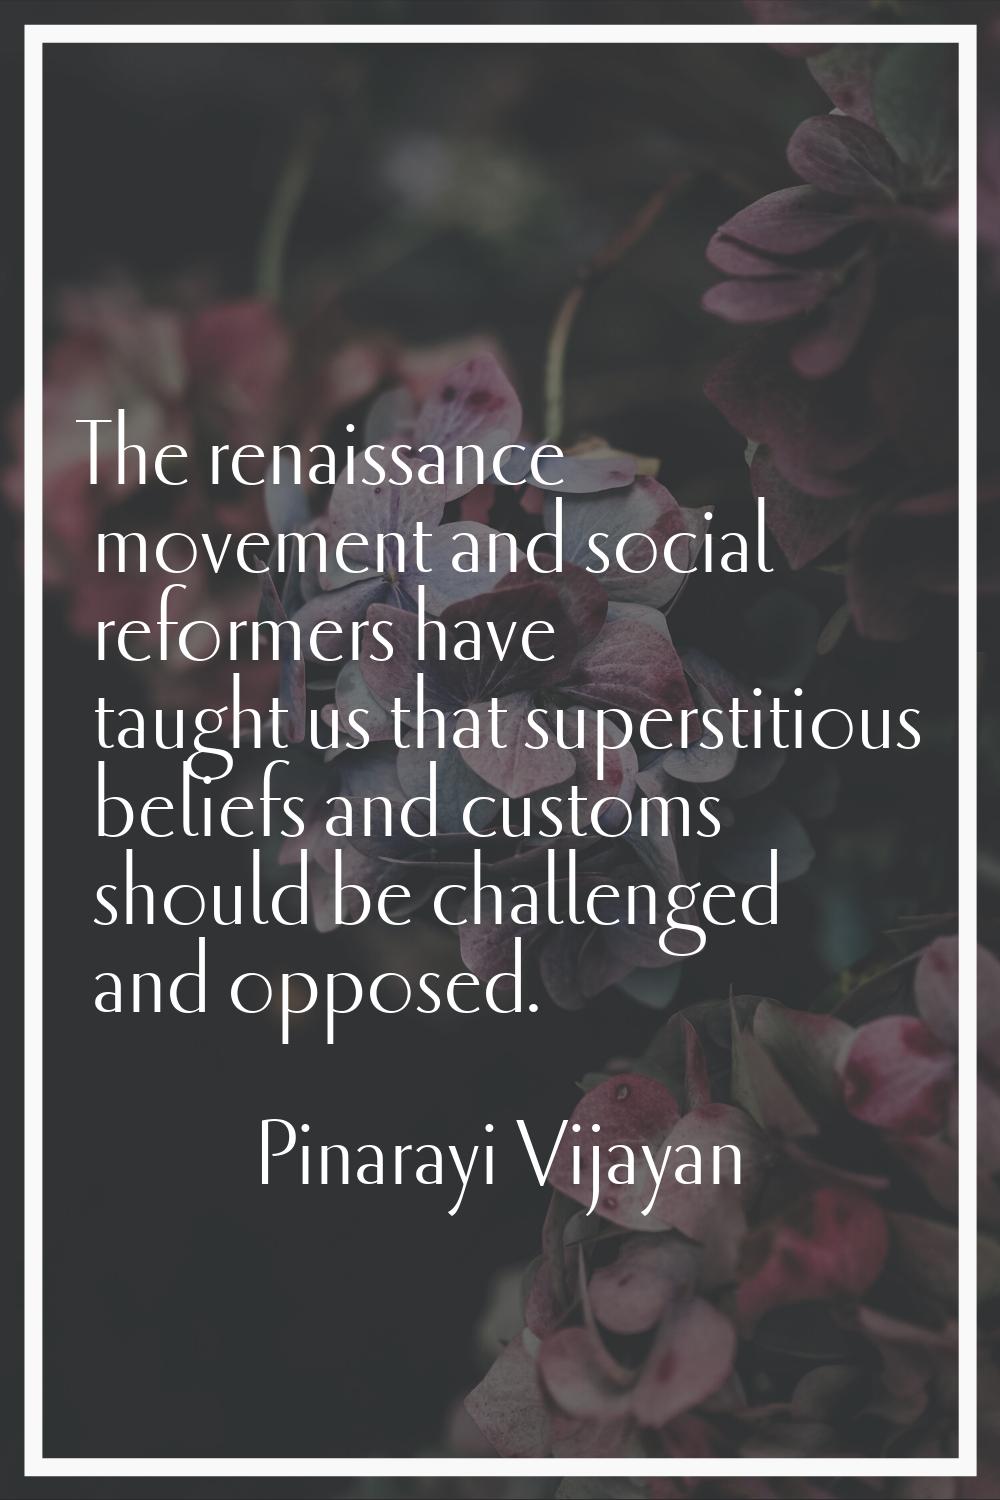 The renaissance movement and social reformers have taught us that superstitious beliefs and customs